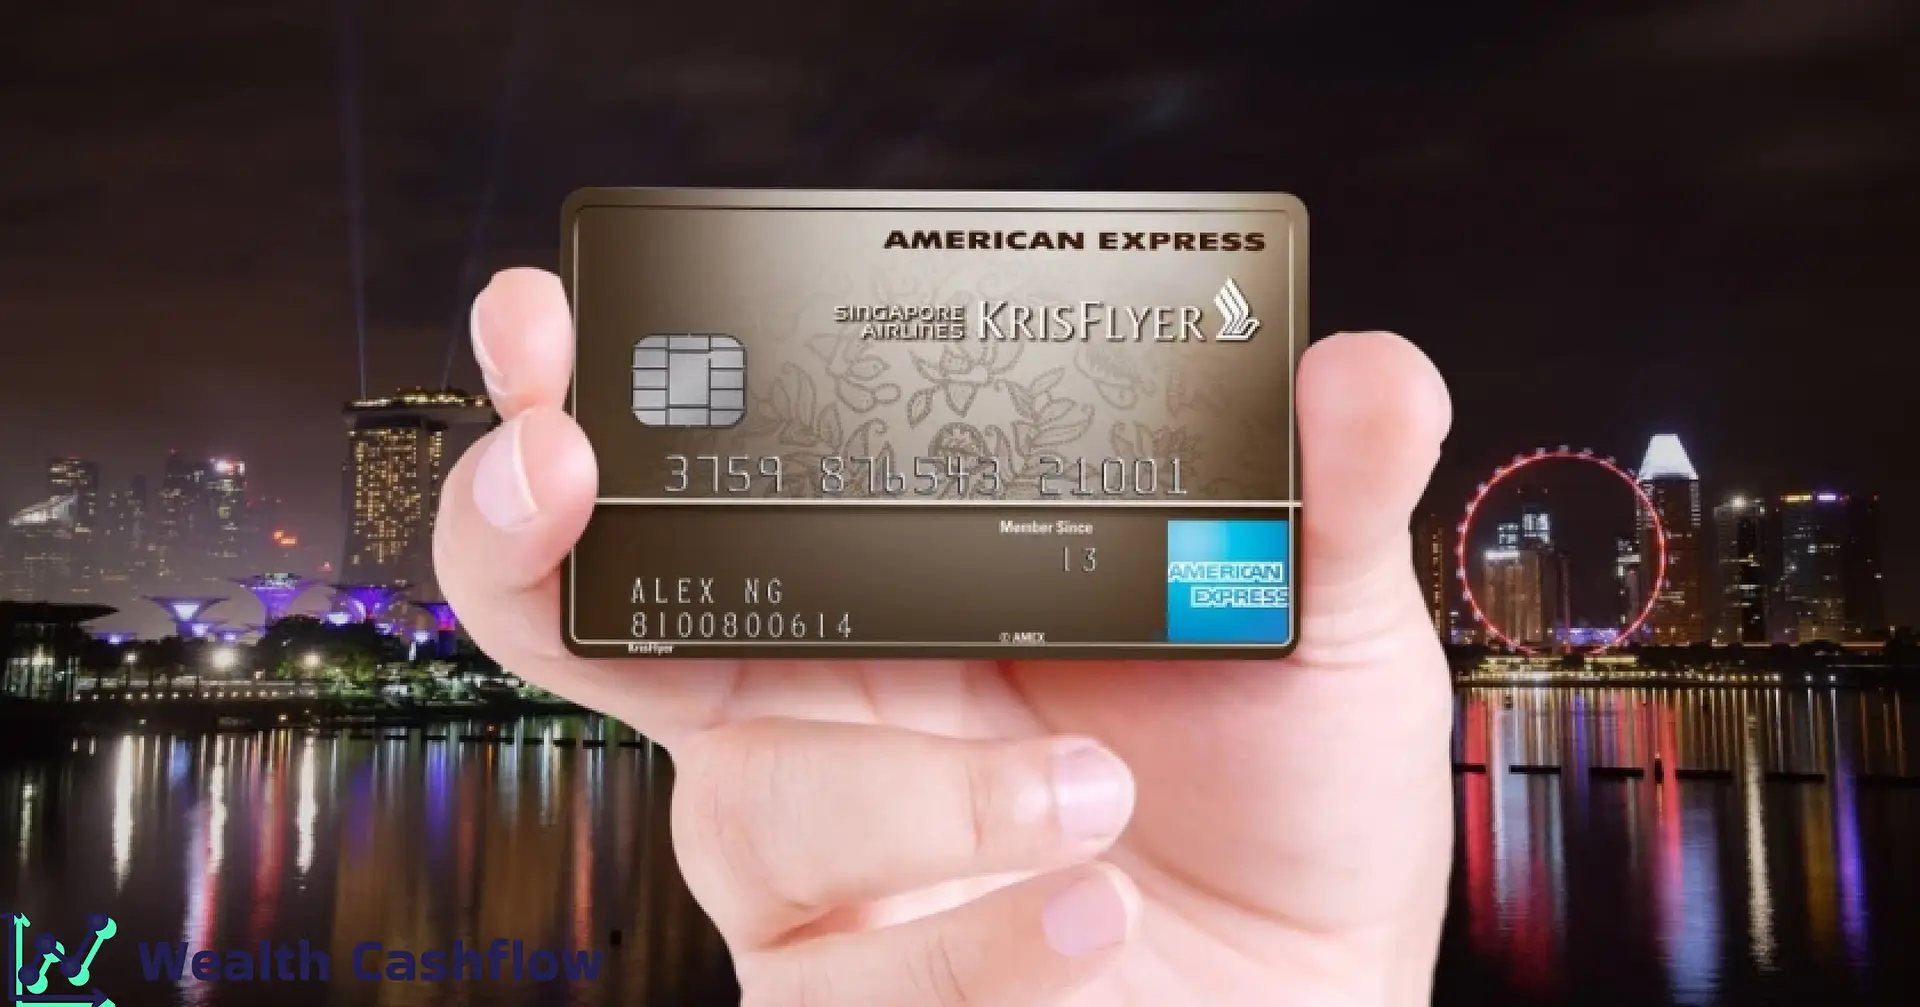 The highest KrisFlyer miles-earning credit cards